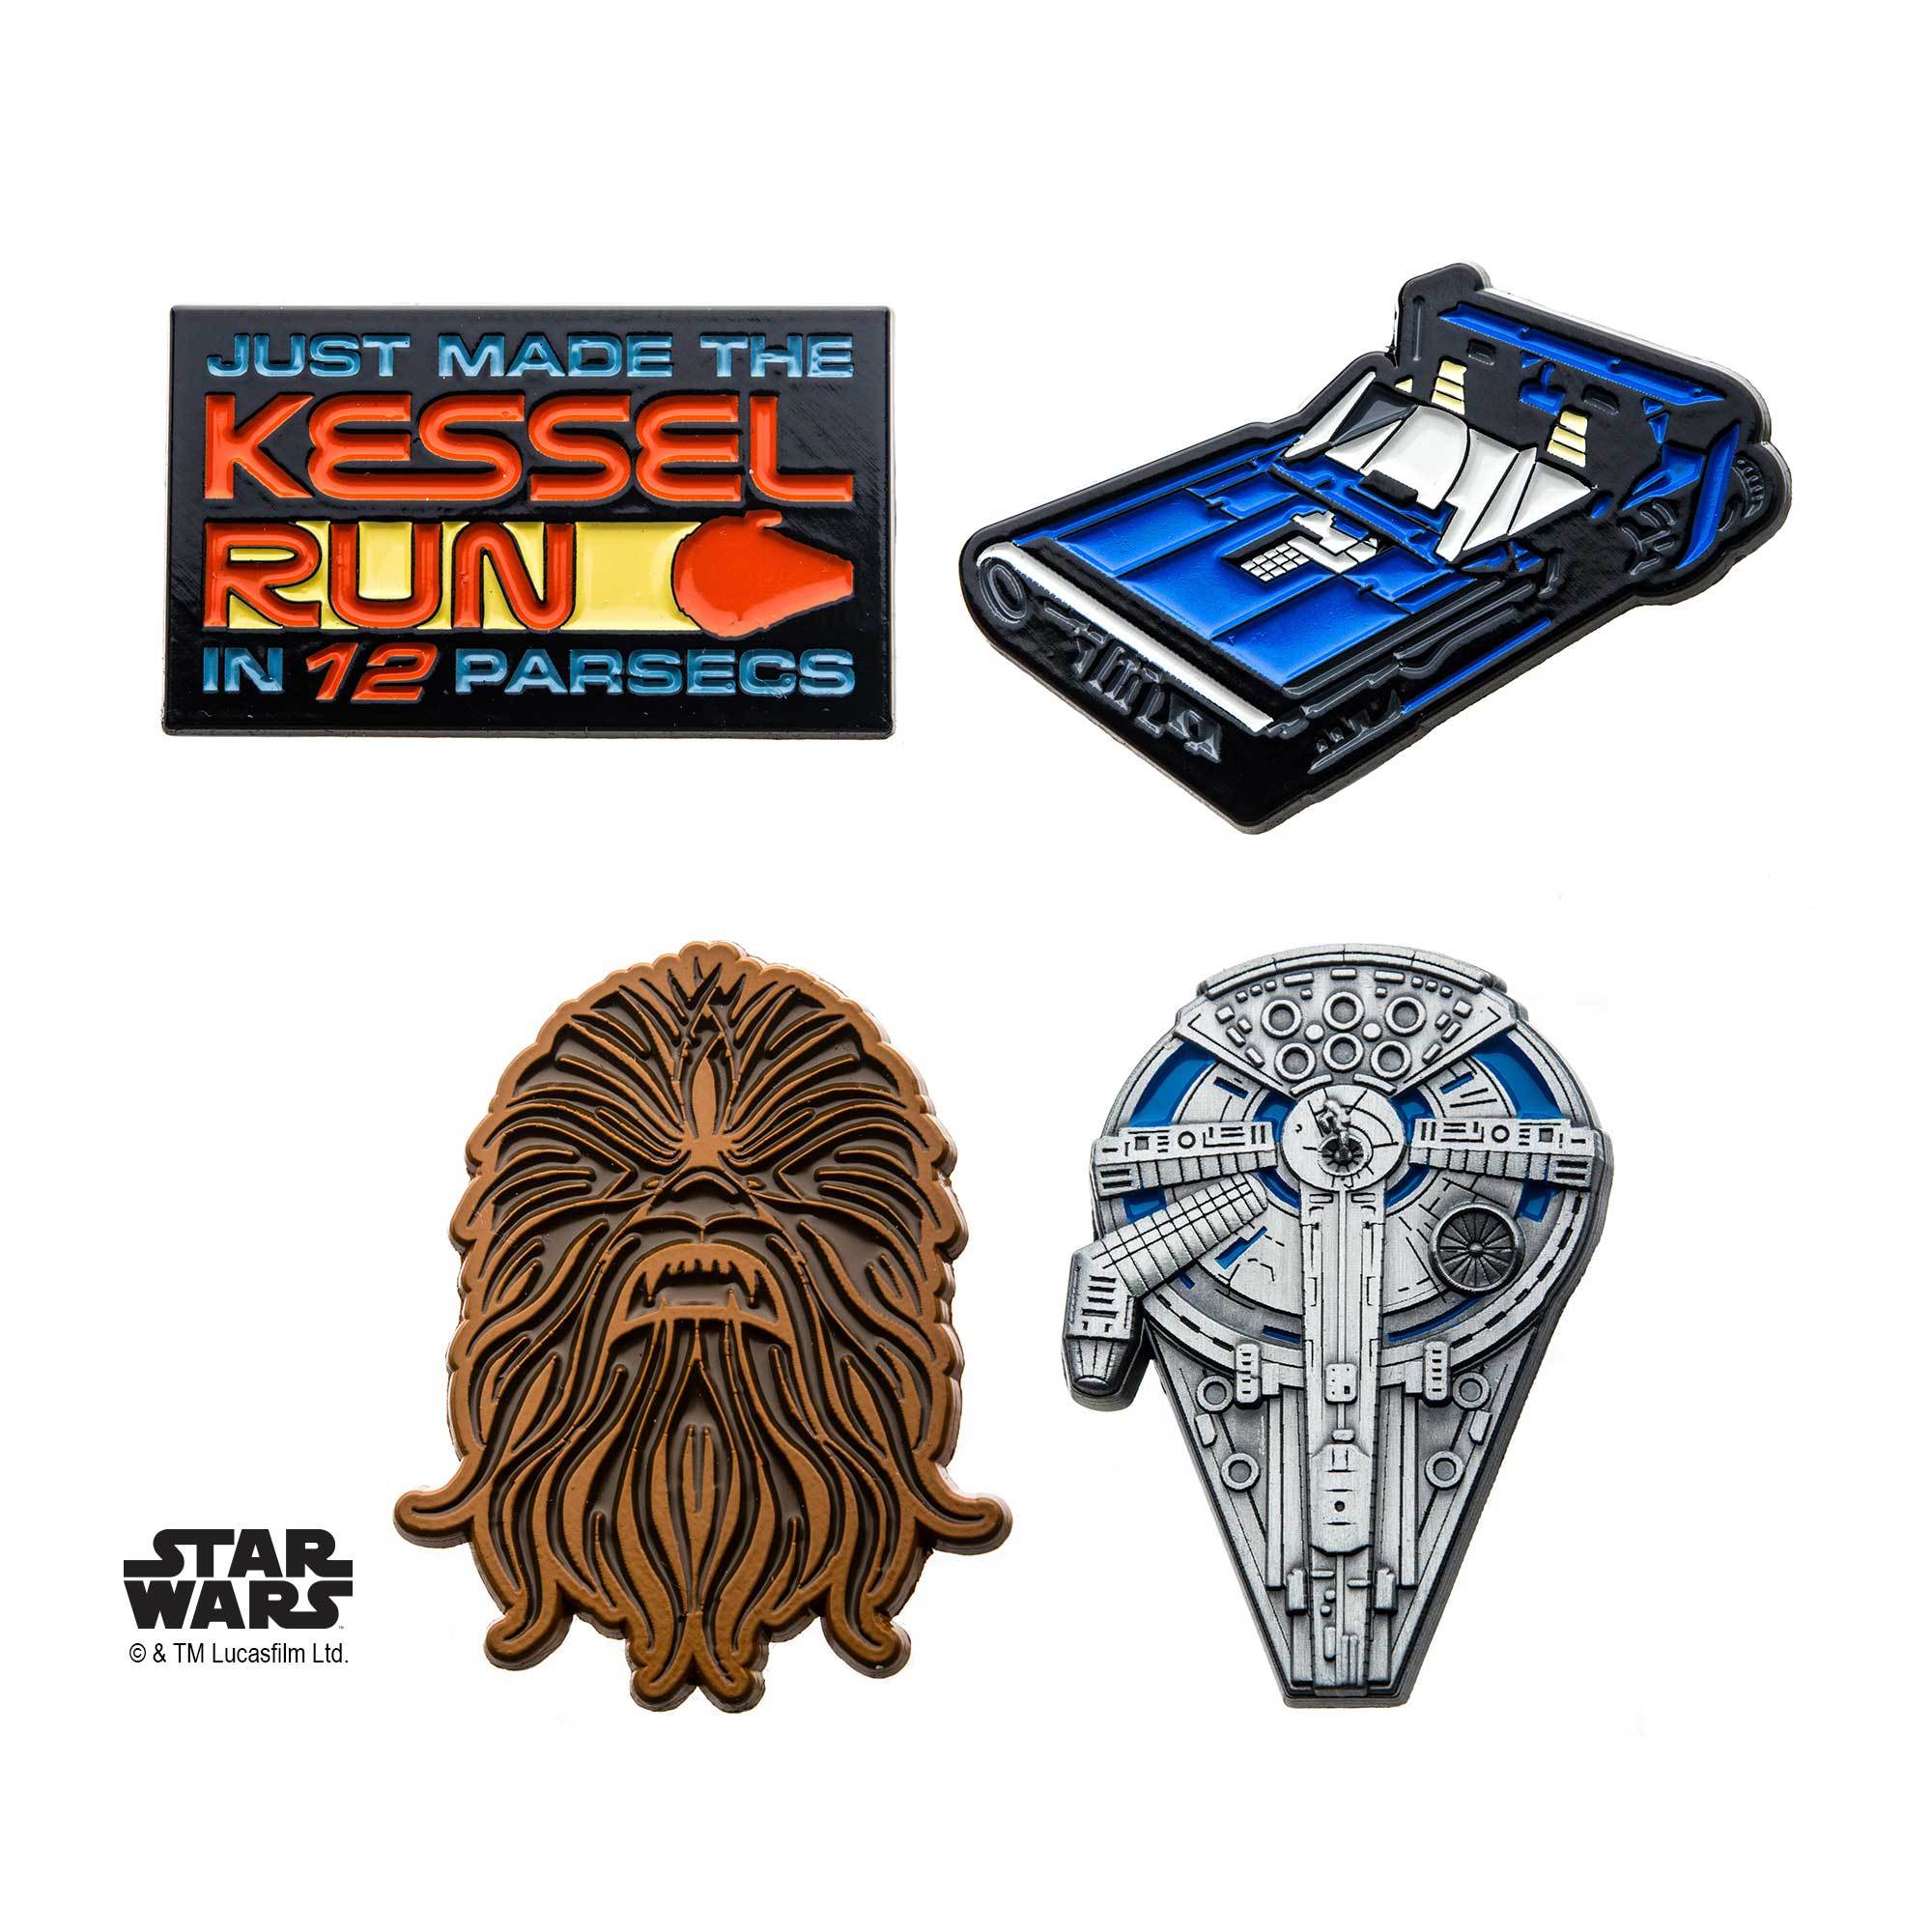 Star Wars 4 piece Metal Pin Set from Solo: A Star Wars Story.